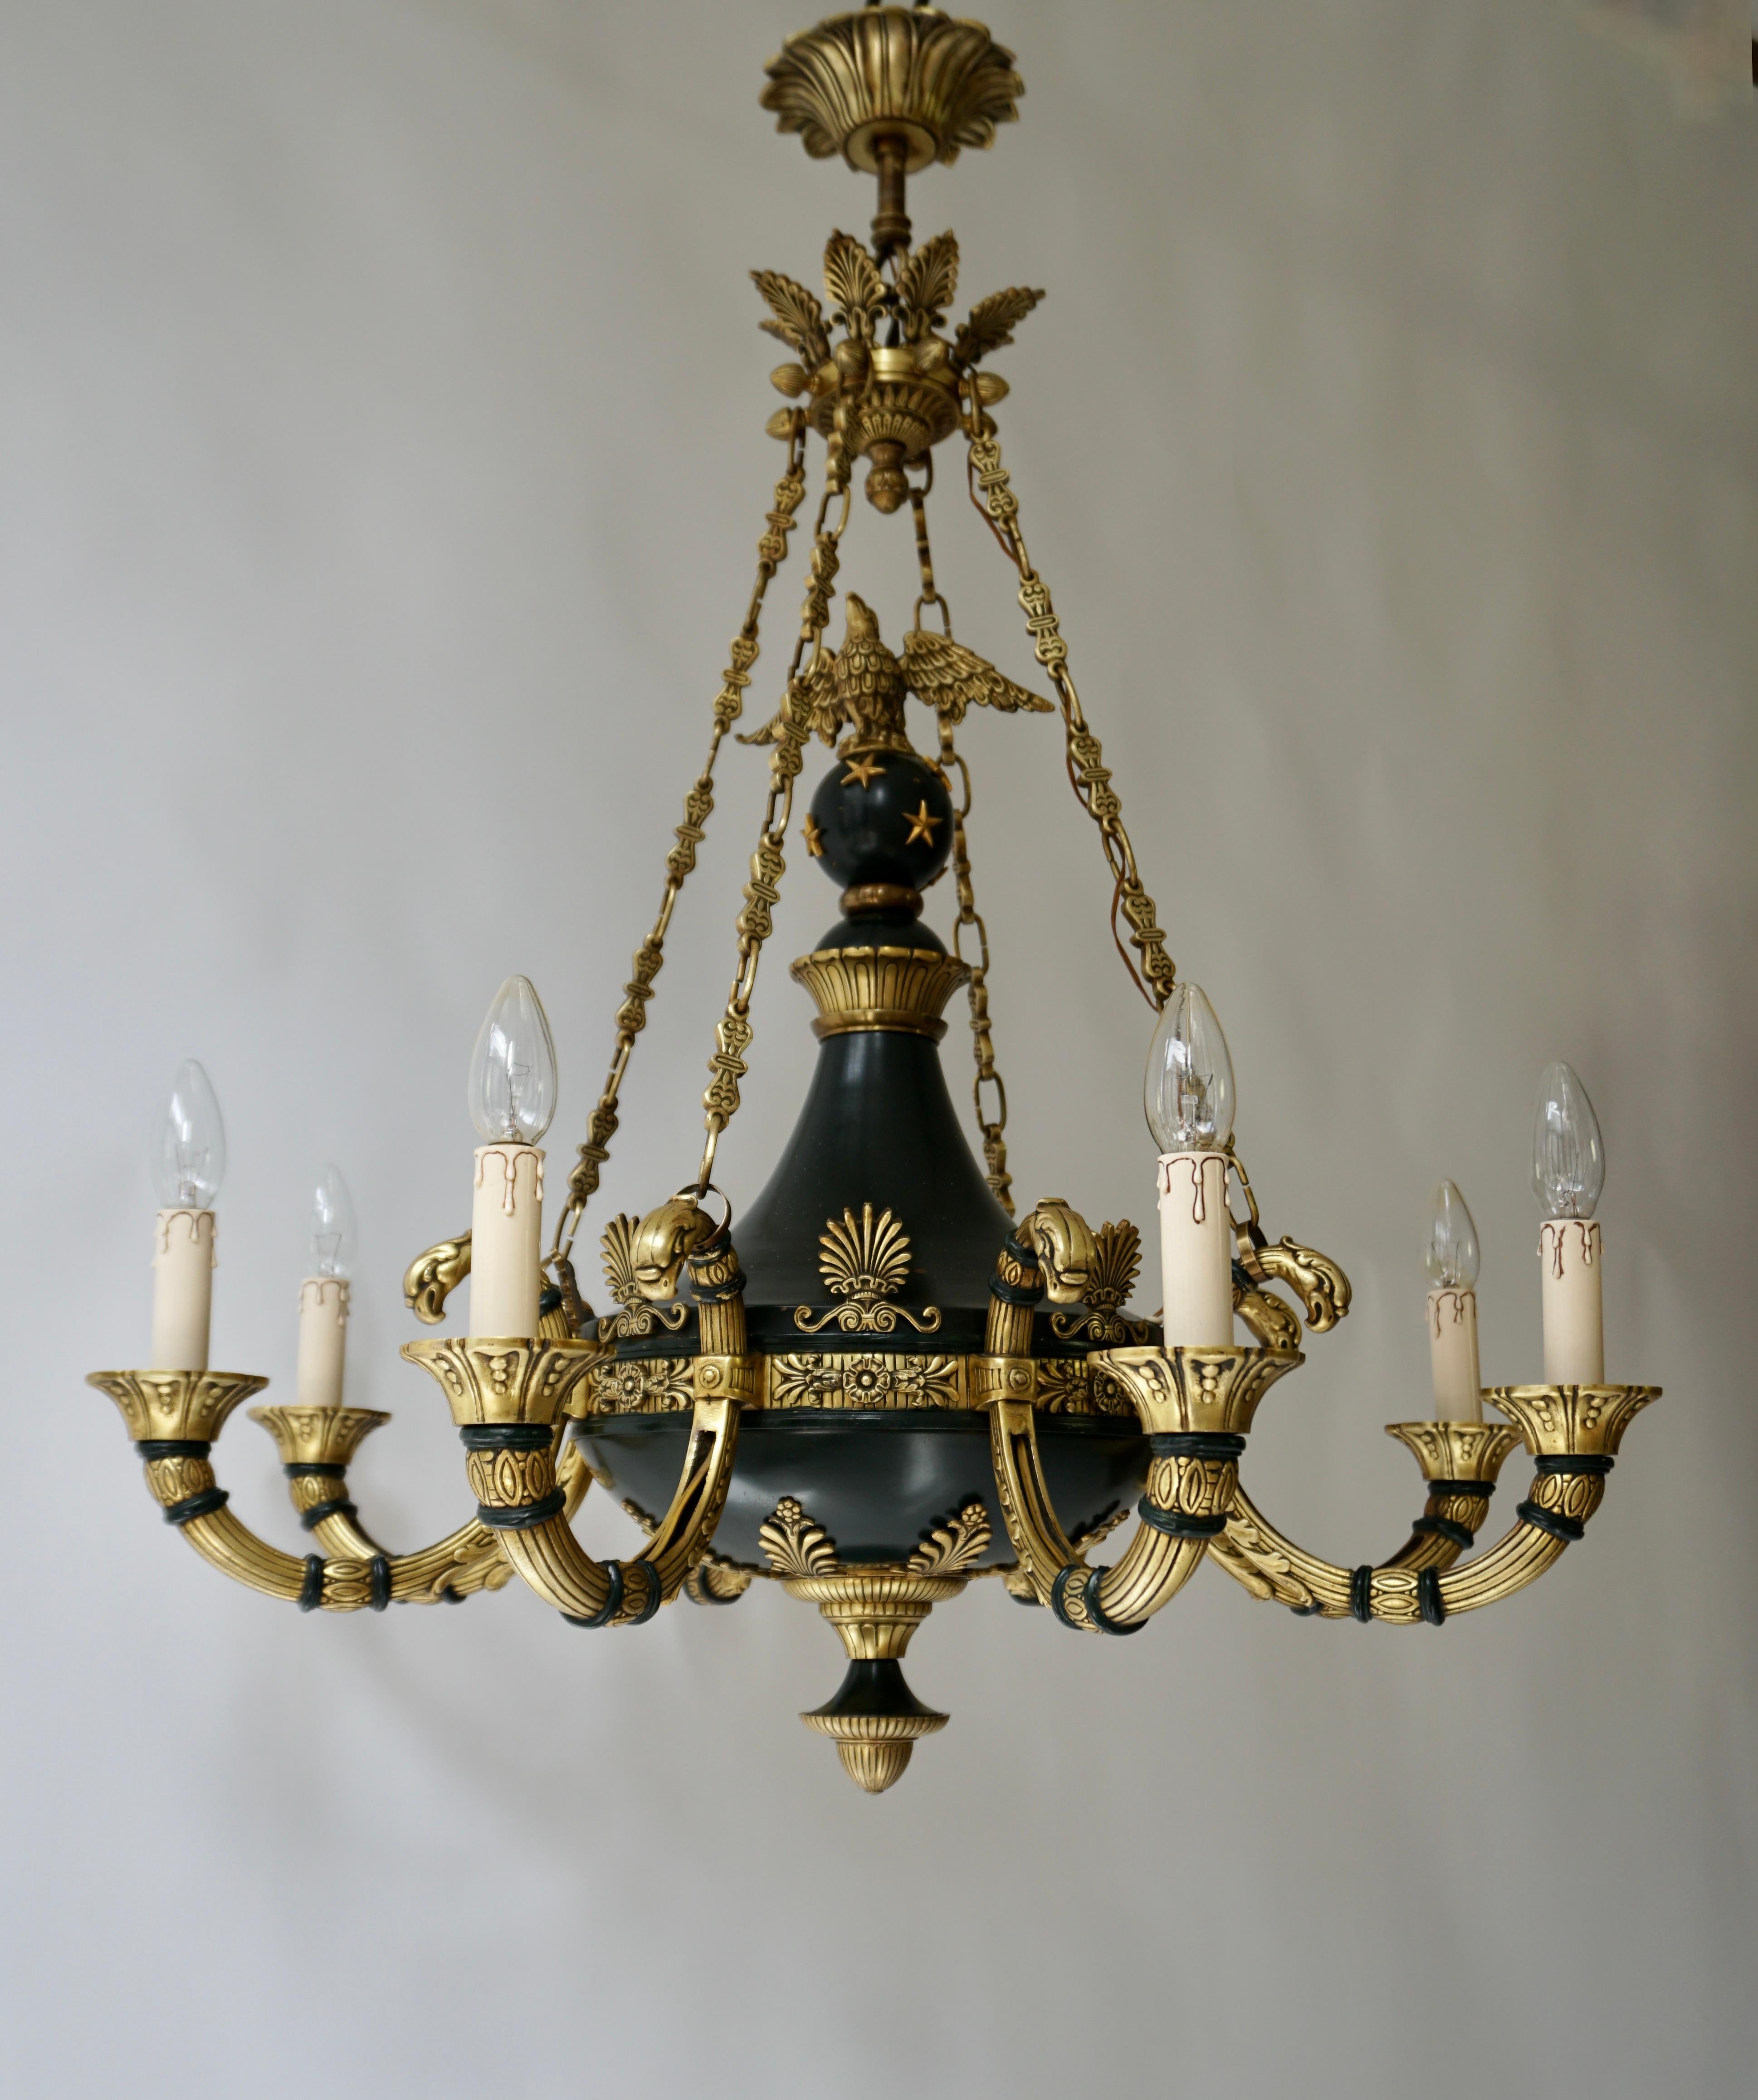 A handsome and high quality French 19th century Empire style patinated bronze gilt chandelier.

A superb and unique antique French Empire style neoclassical gilt and patinated bronze multi light chandelier of fine detail.This fine chandelier is